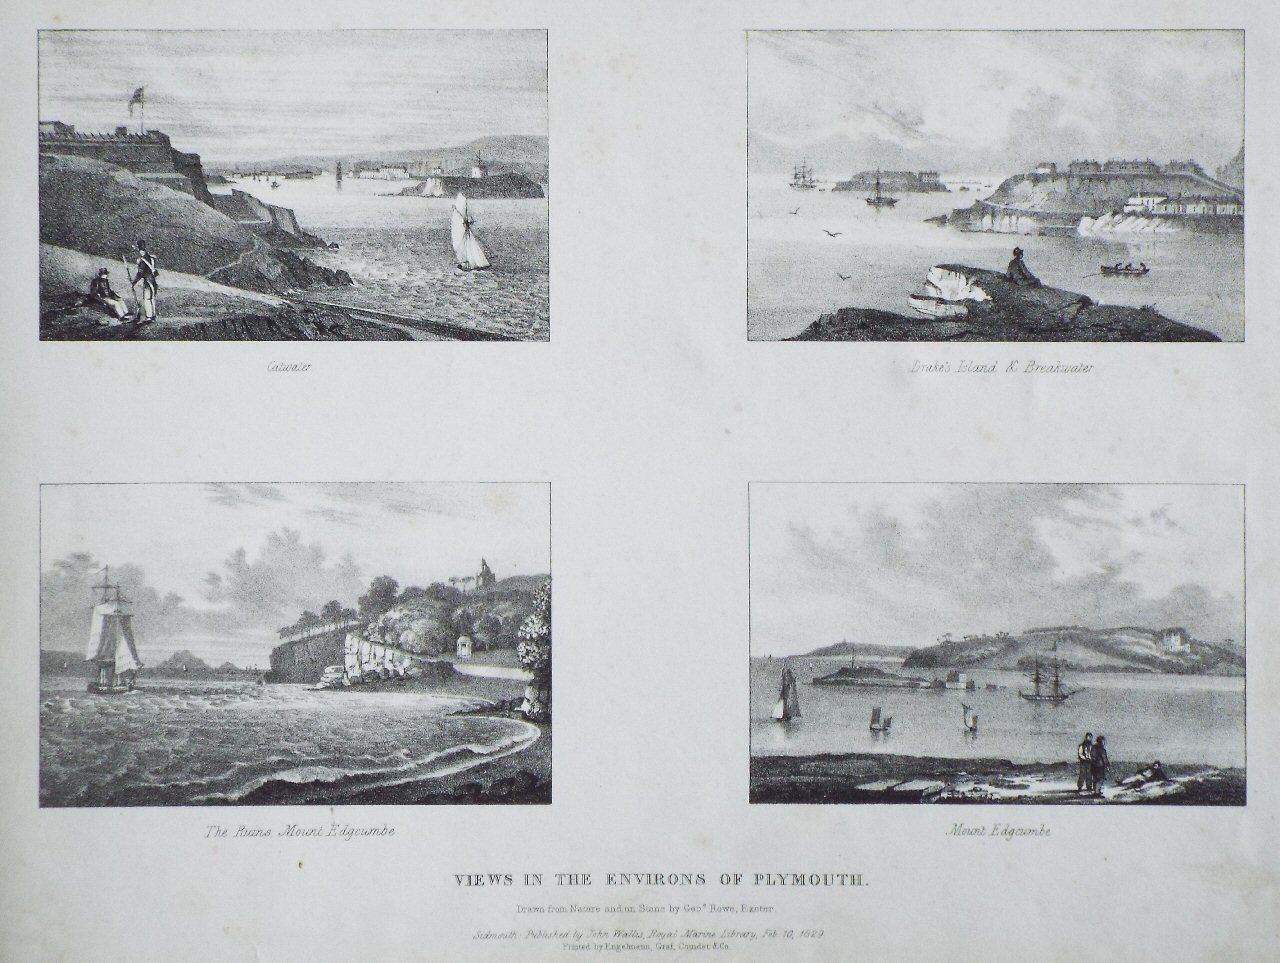 Lithograph - Views in the environs of Plymouth. Catwater, Drake's Island & Breakwater, The Ruins Mount Edgcumbe, Mount Edgecumbe - Rowe